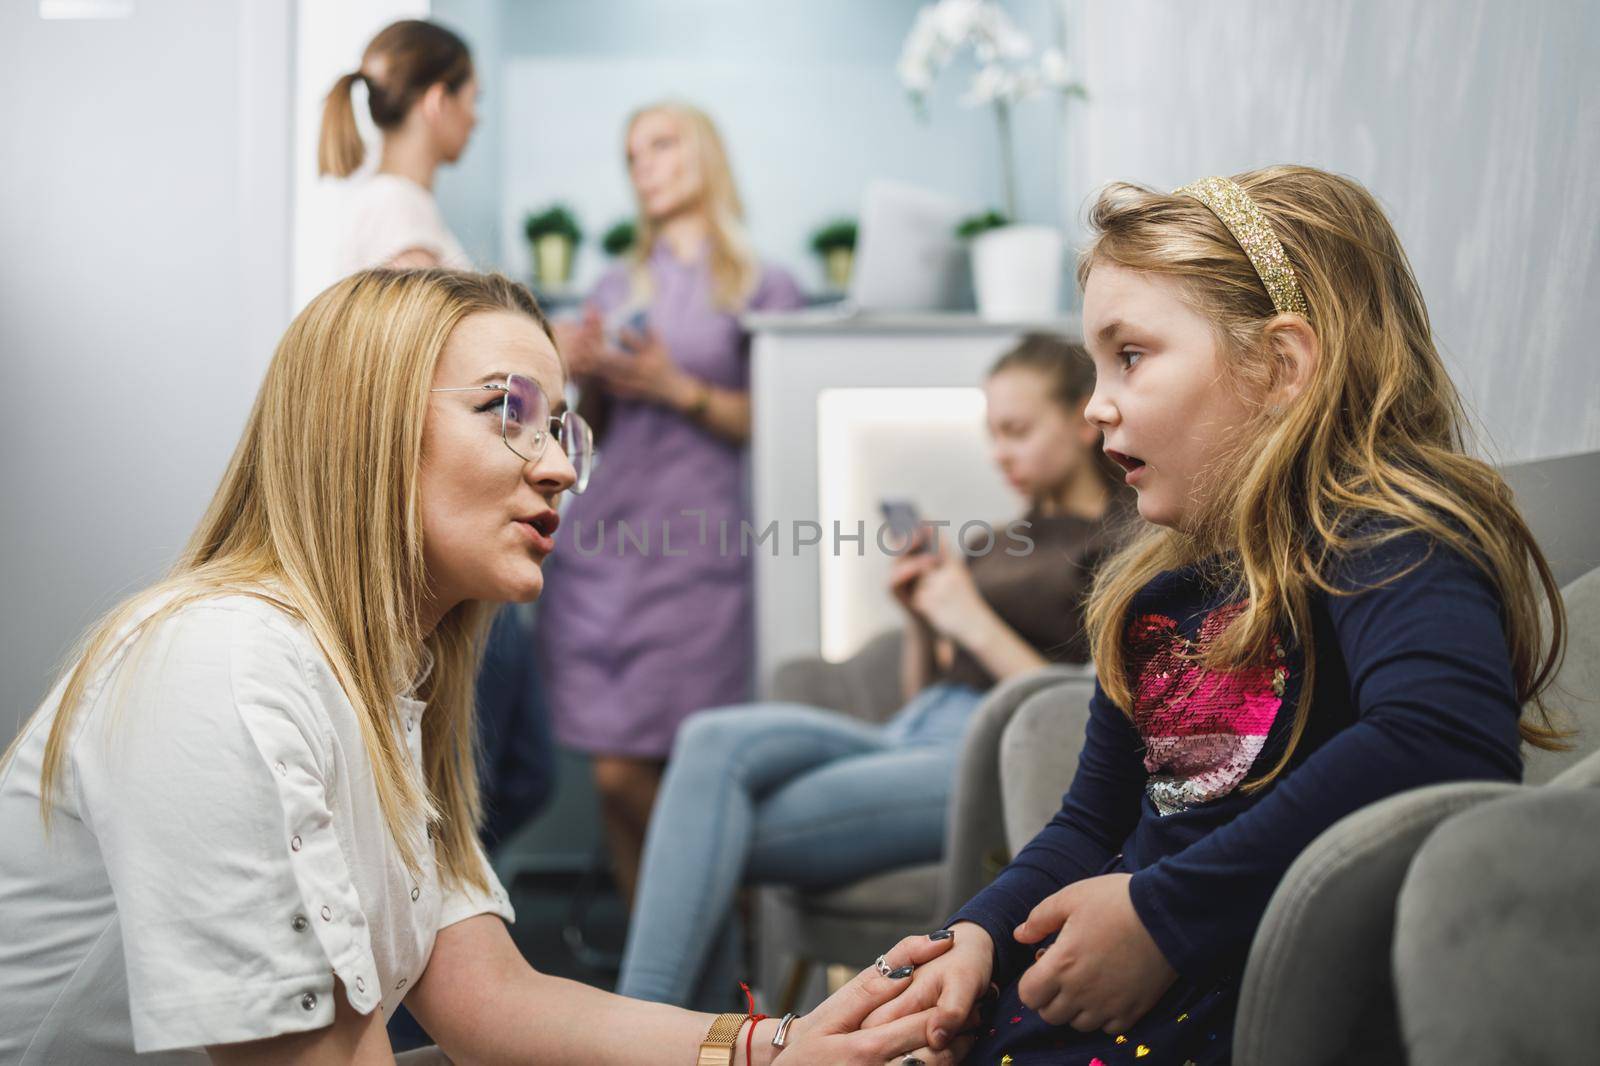 Female dentist and little girl communicating in waiting room at dentist's office.